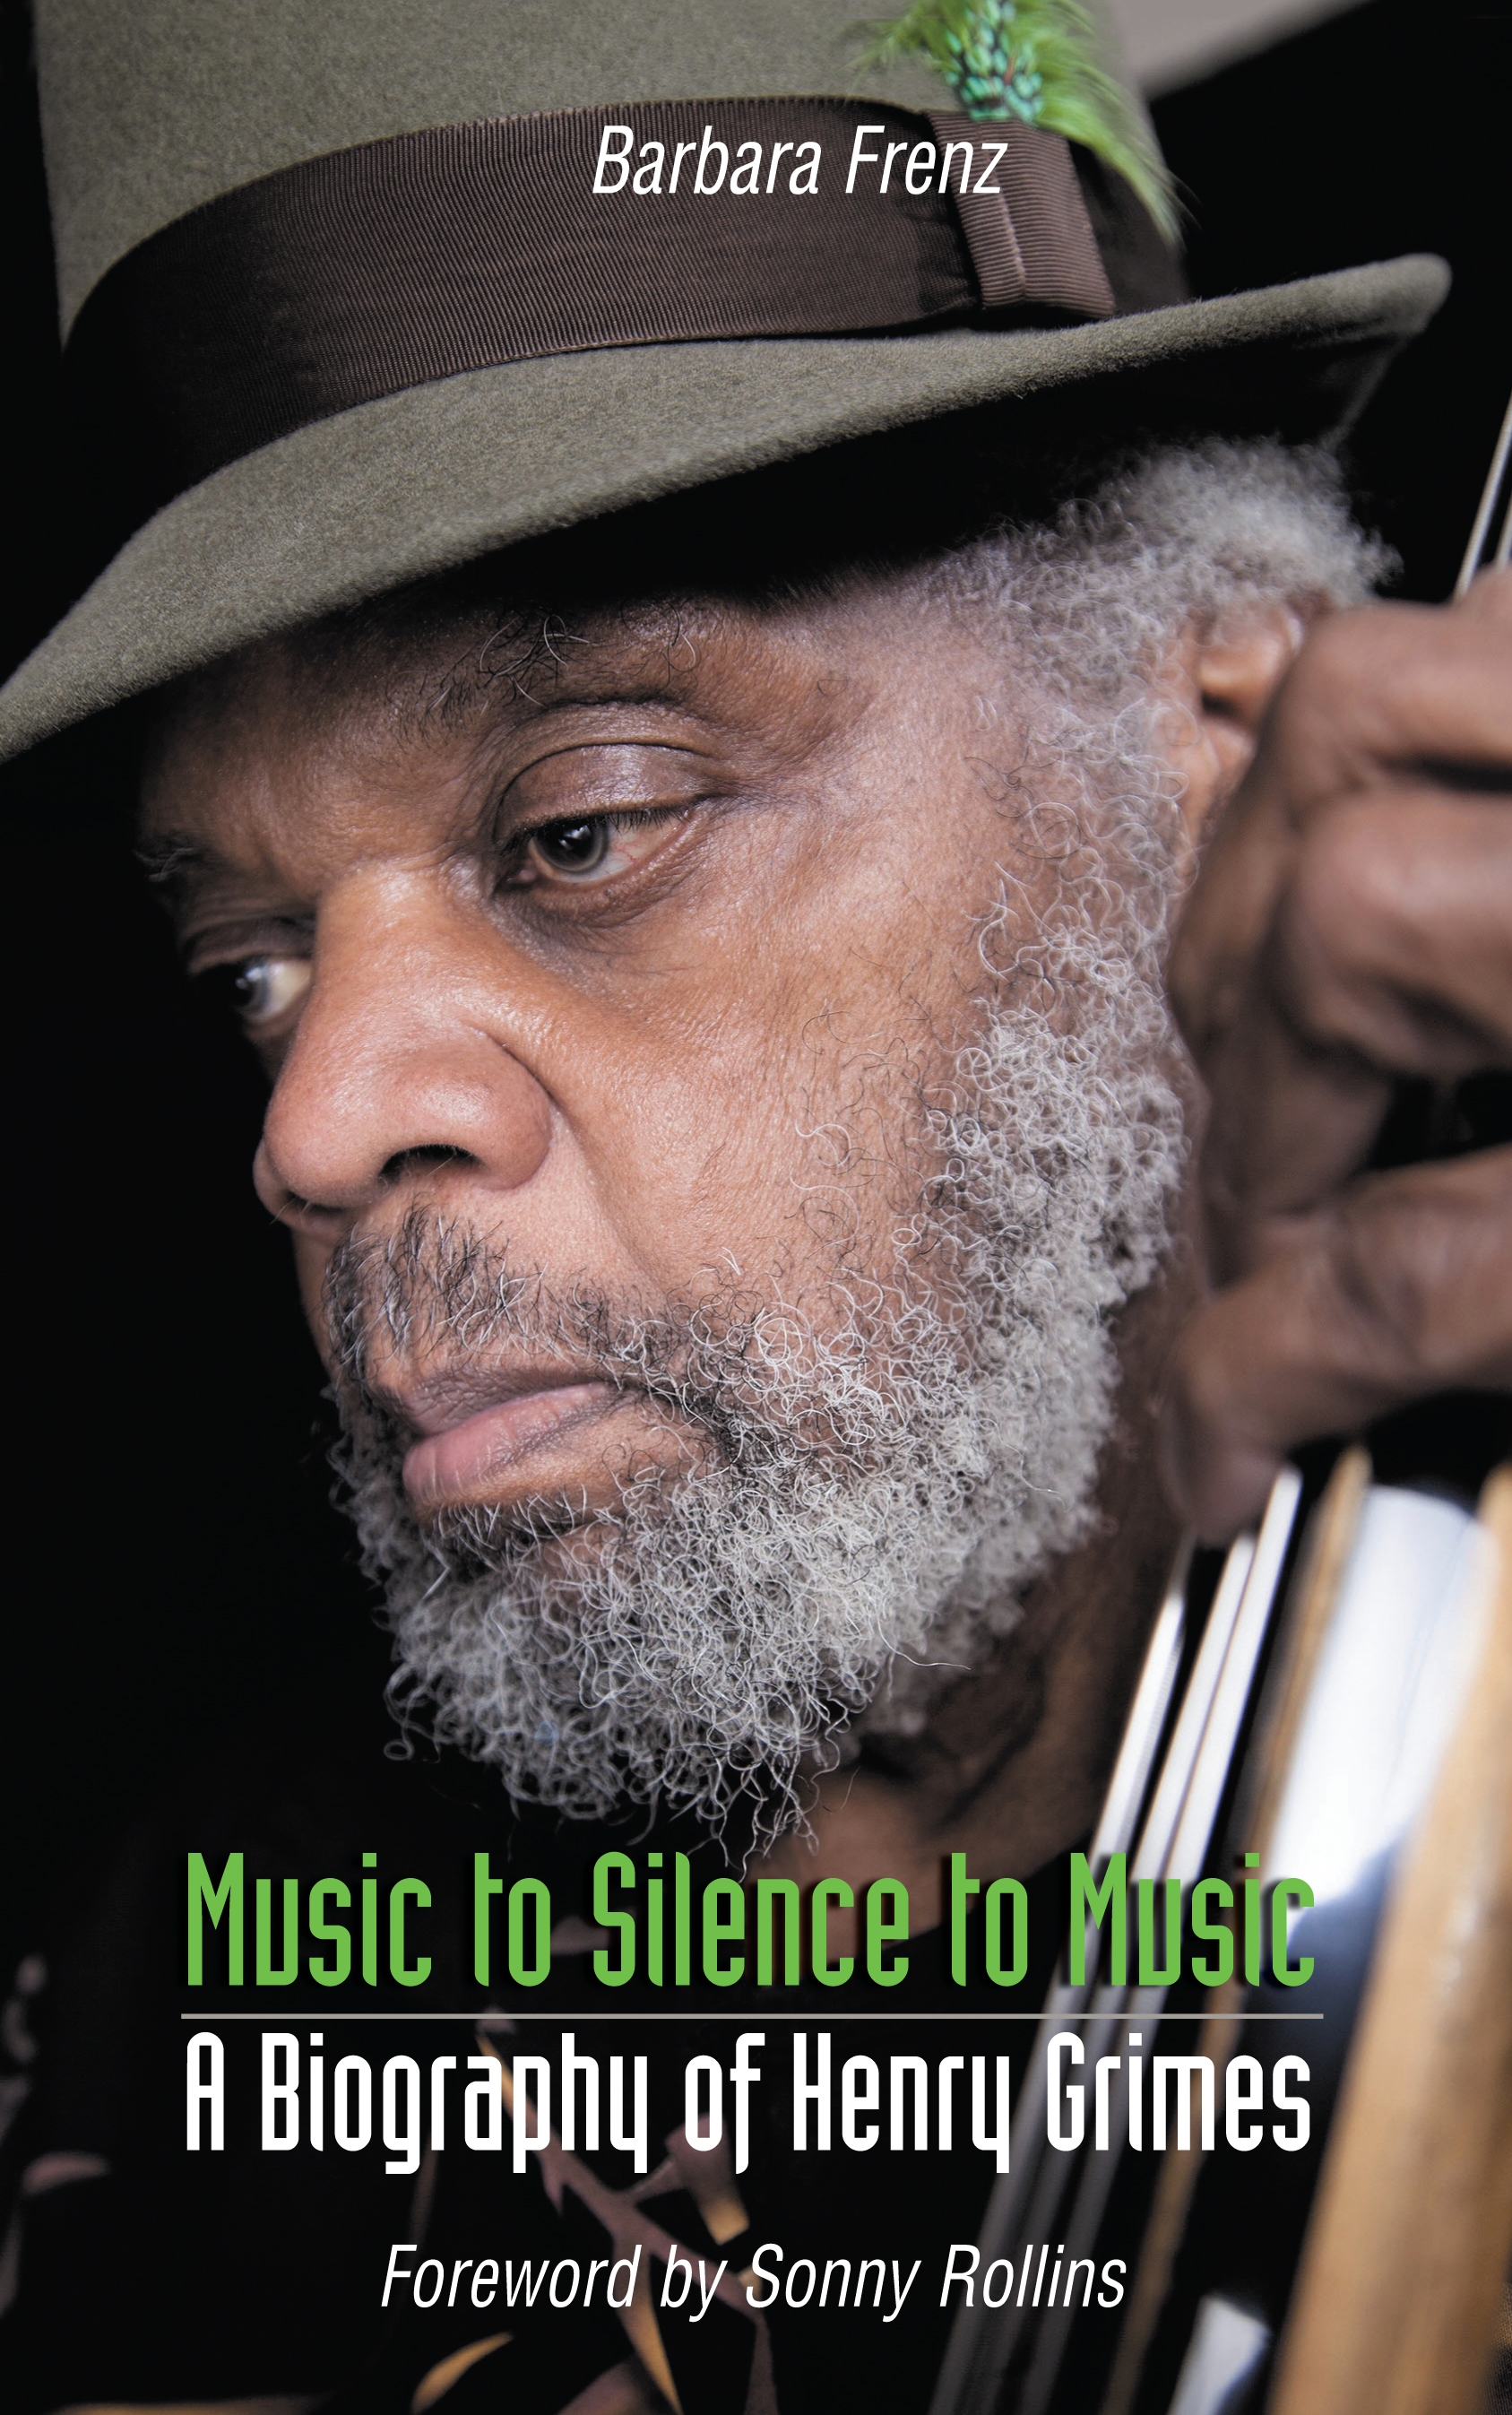 Barbara Frenz, Music to Silence to Music. A Biography of Henry Grimes. Foreword by Sonny Rollins. Northway Books London, 2015 Cover-(Foto: Hollis King, 2014)